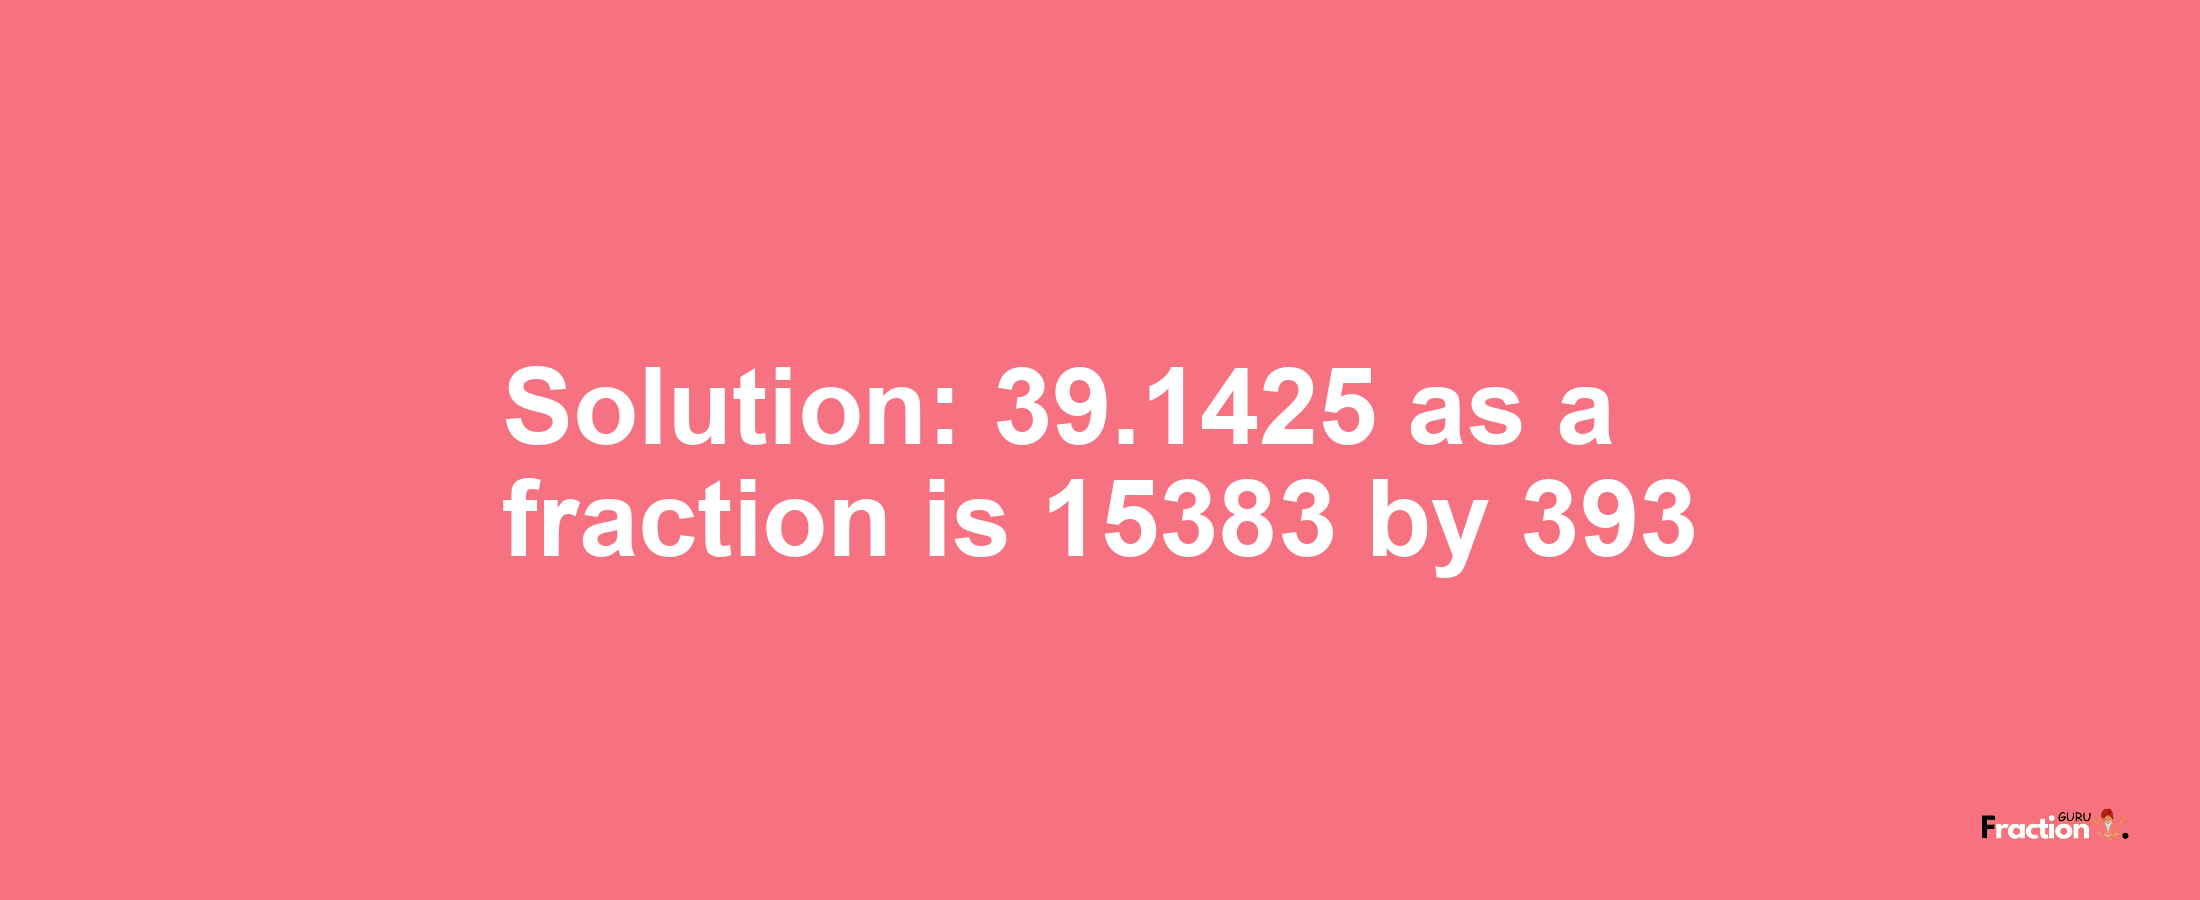 Solution:39.1425 as a fraction is 15383/393